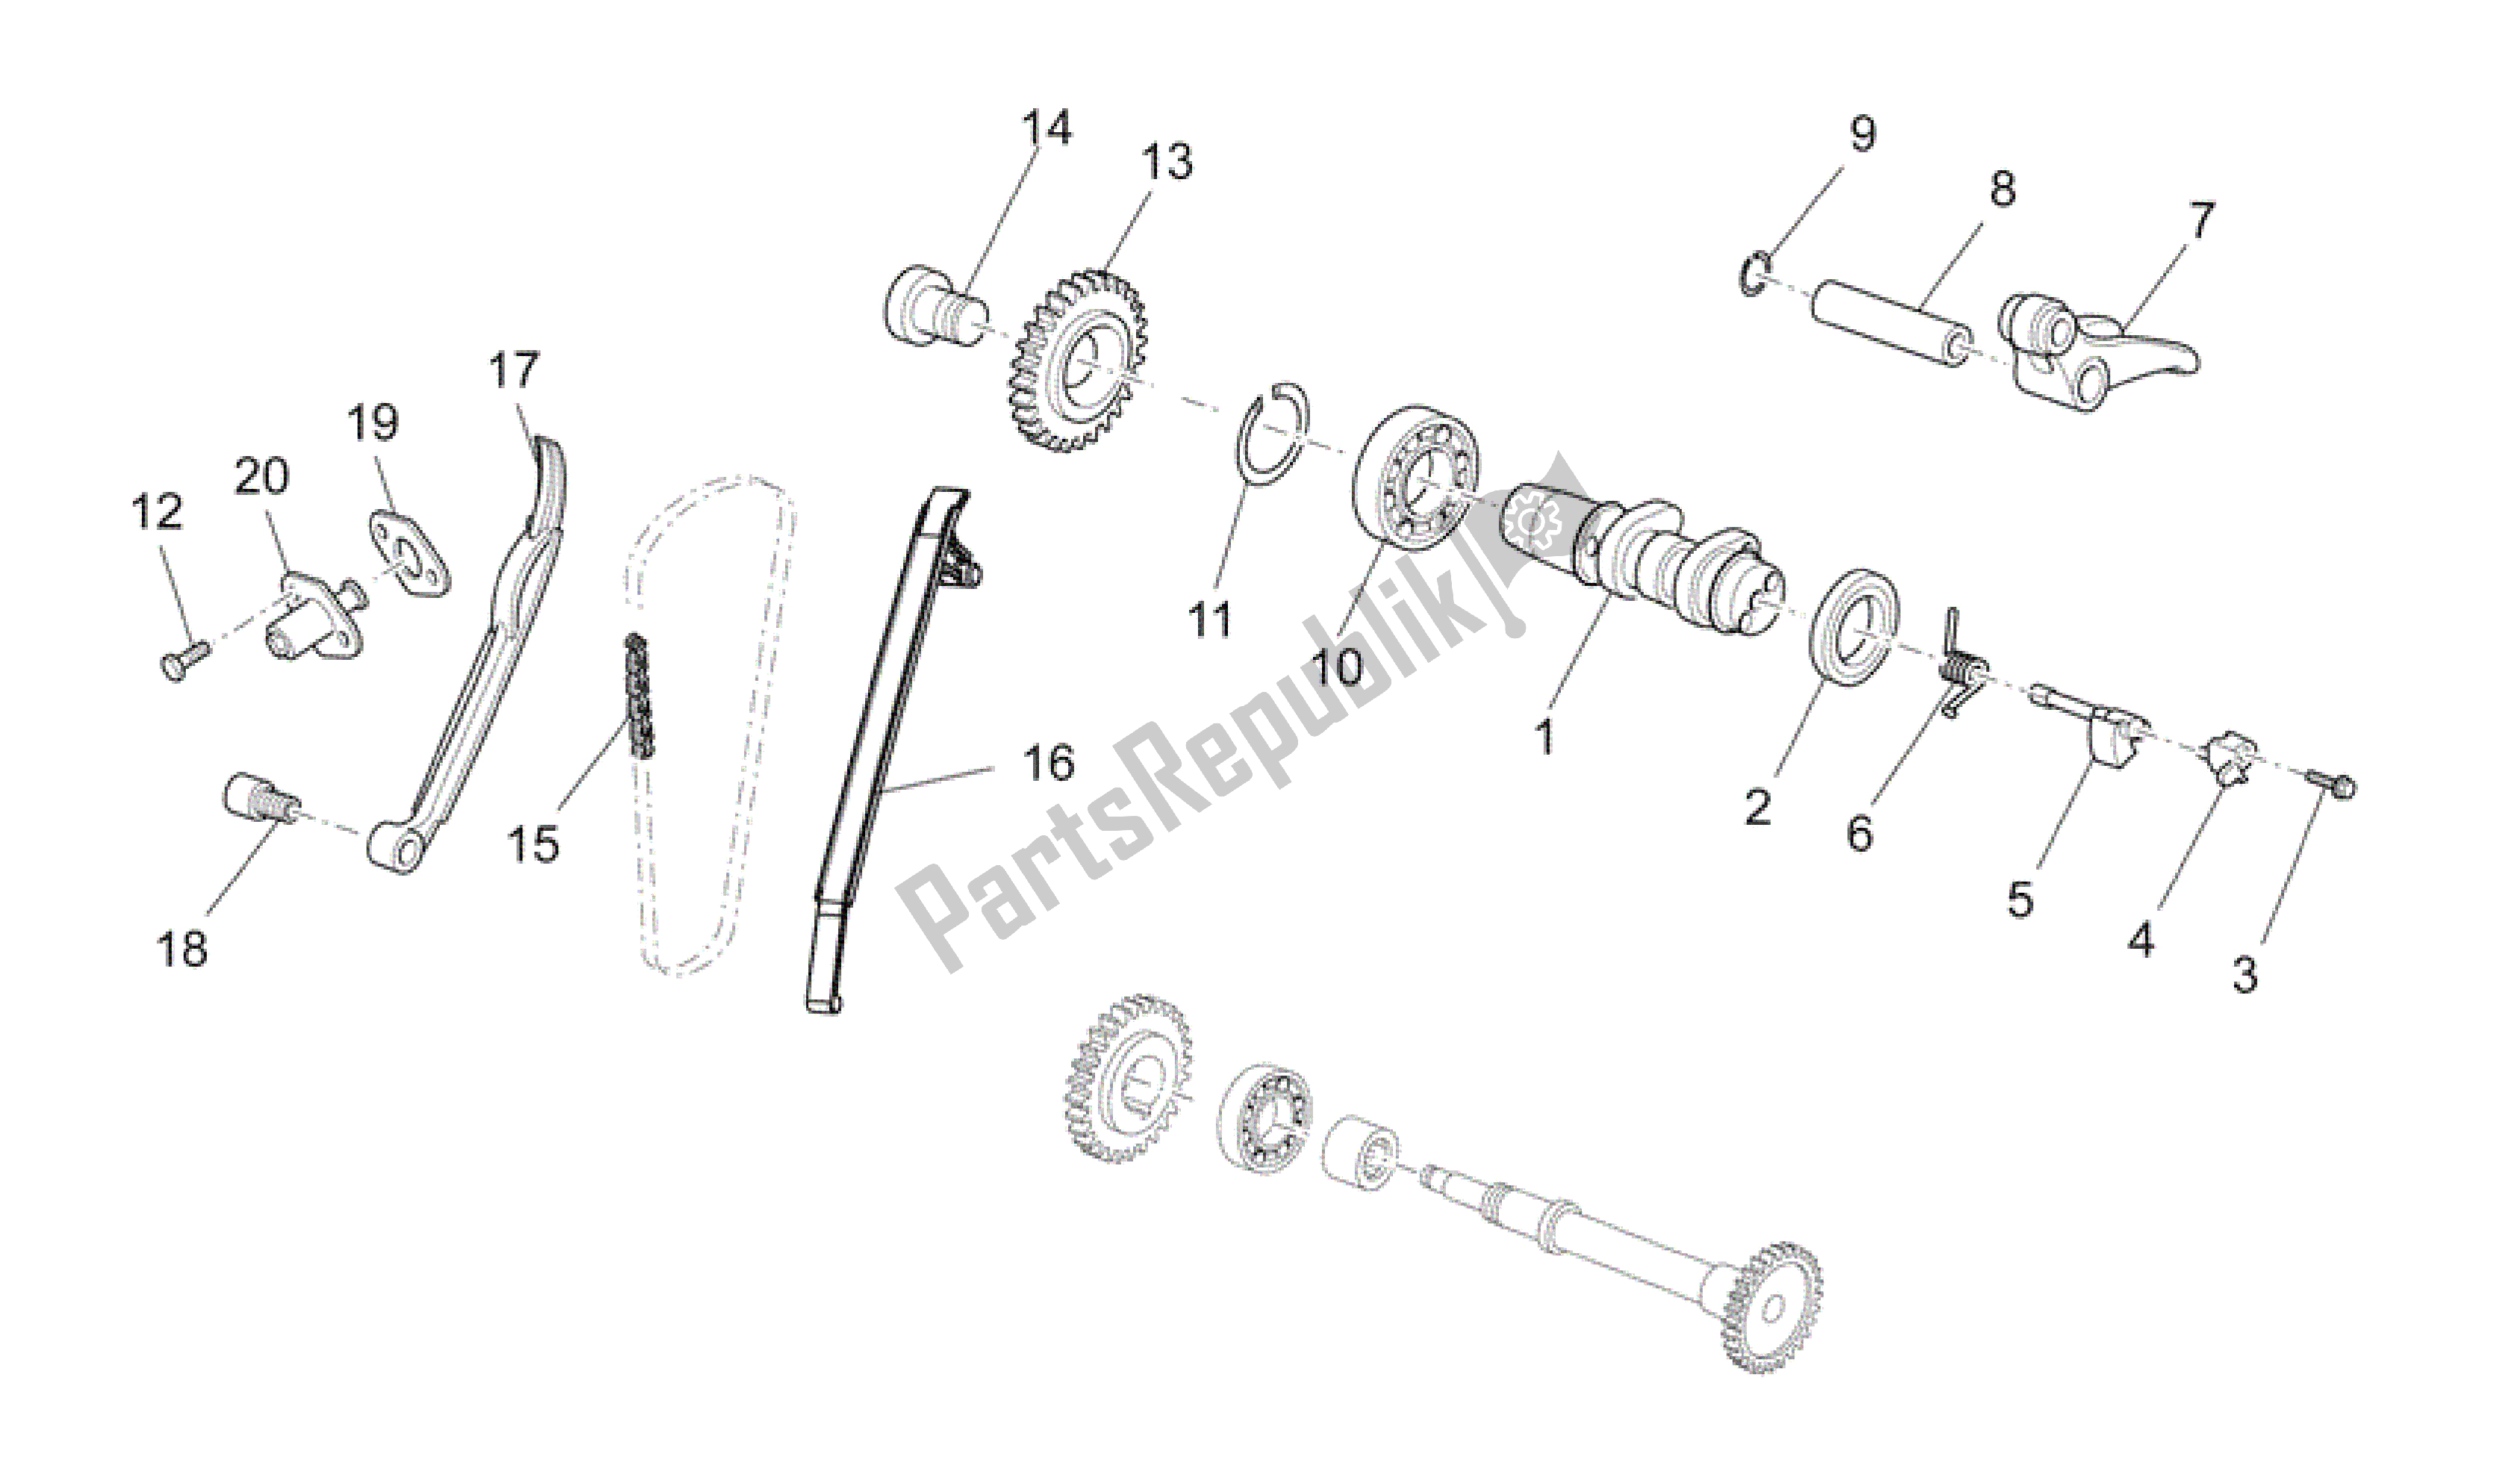 All parts for the Rear Cylinder Timing System of the Aprilia RXV 550 2009 - 2011